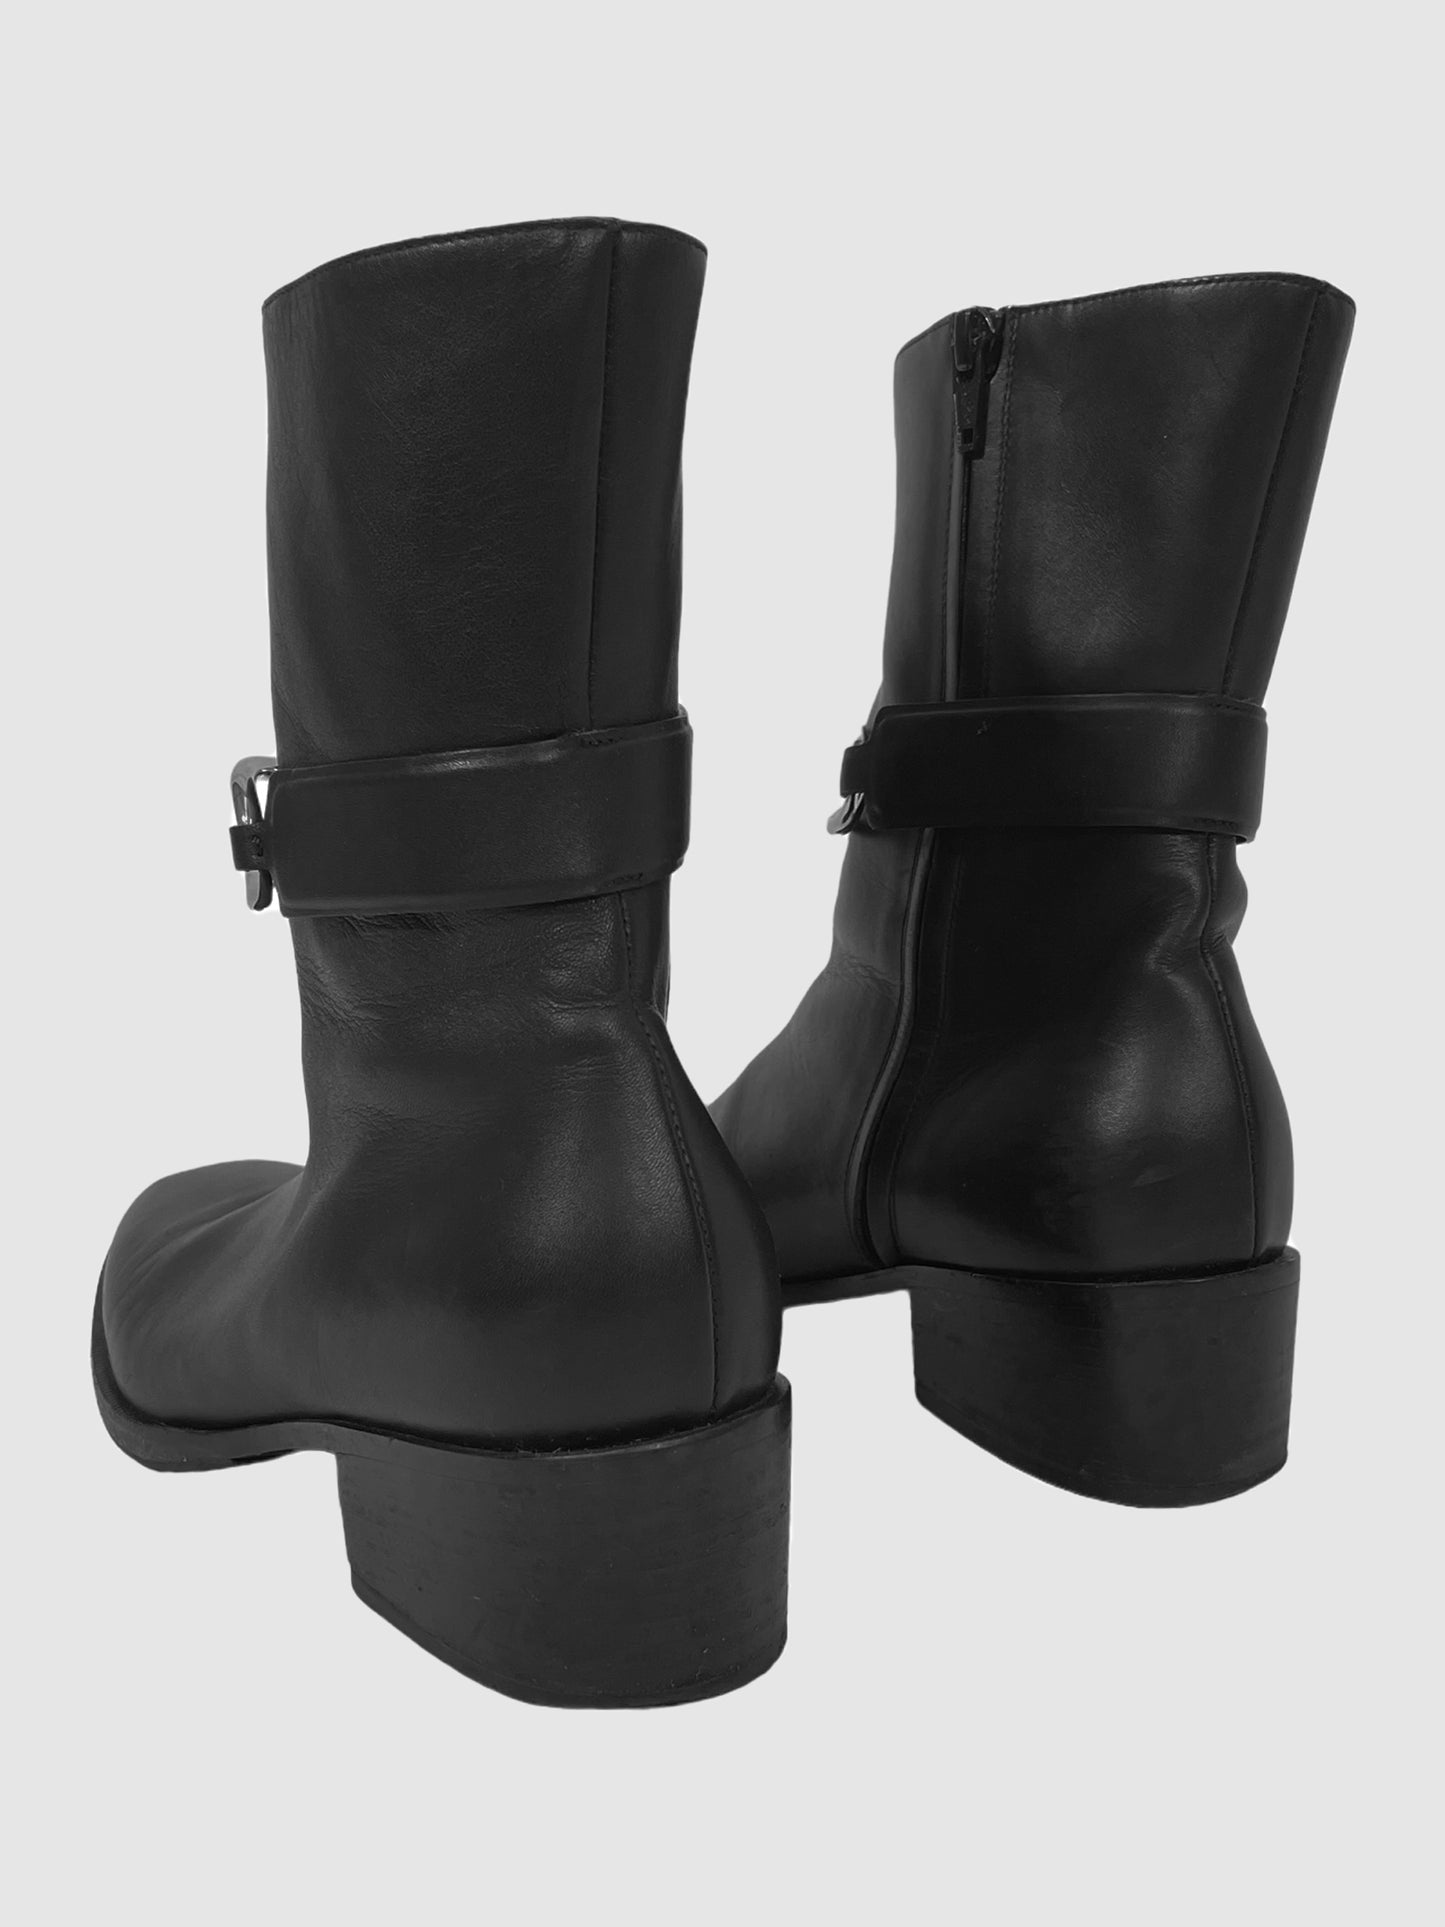 Balenciaga Infinity Link Leather Boots - Size 36.5